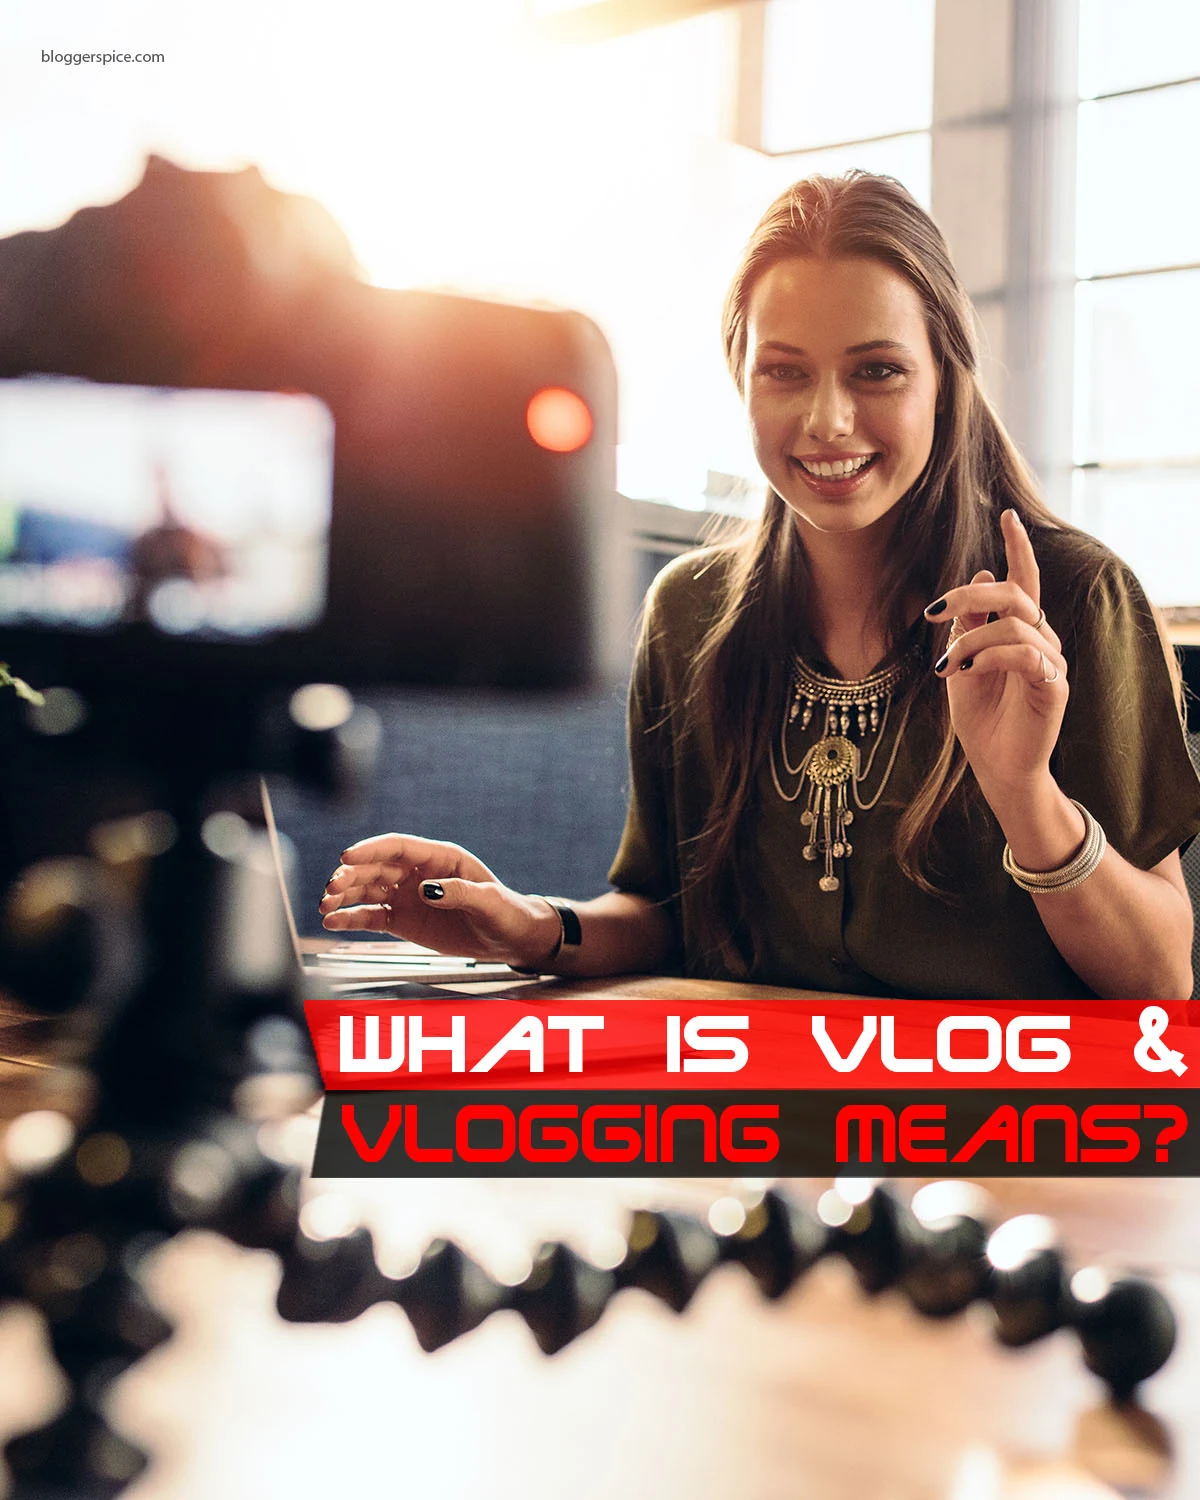 check out all this great information we have for those planning on becoming vloggers,